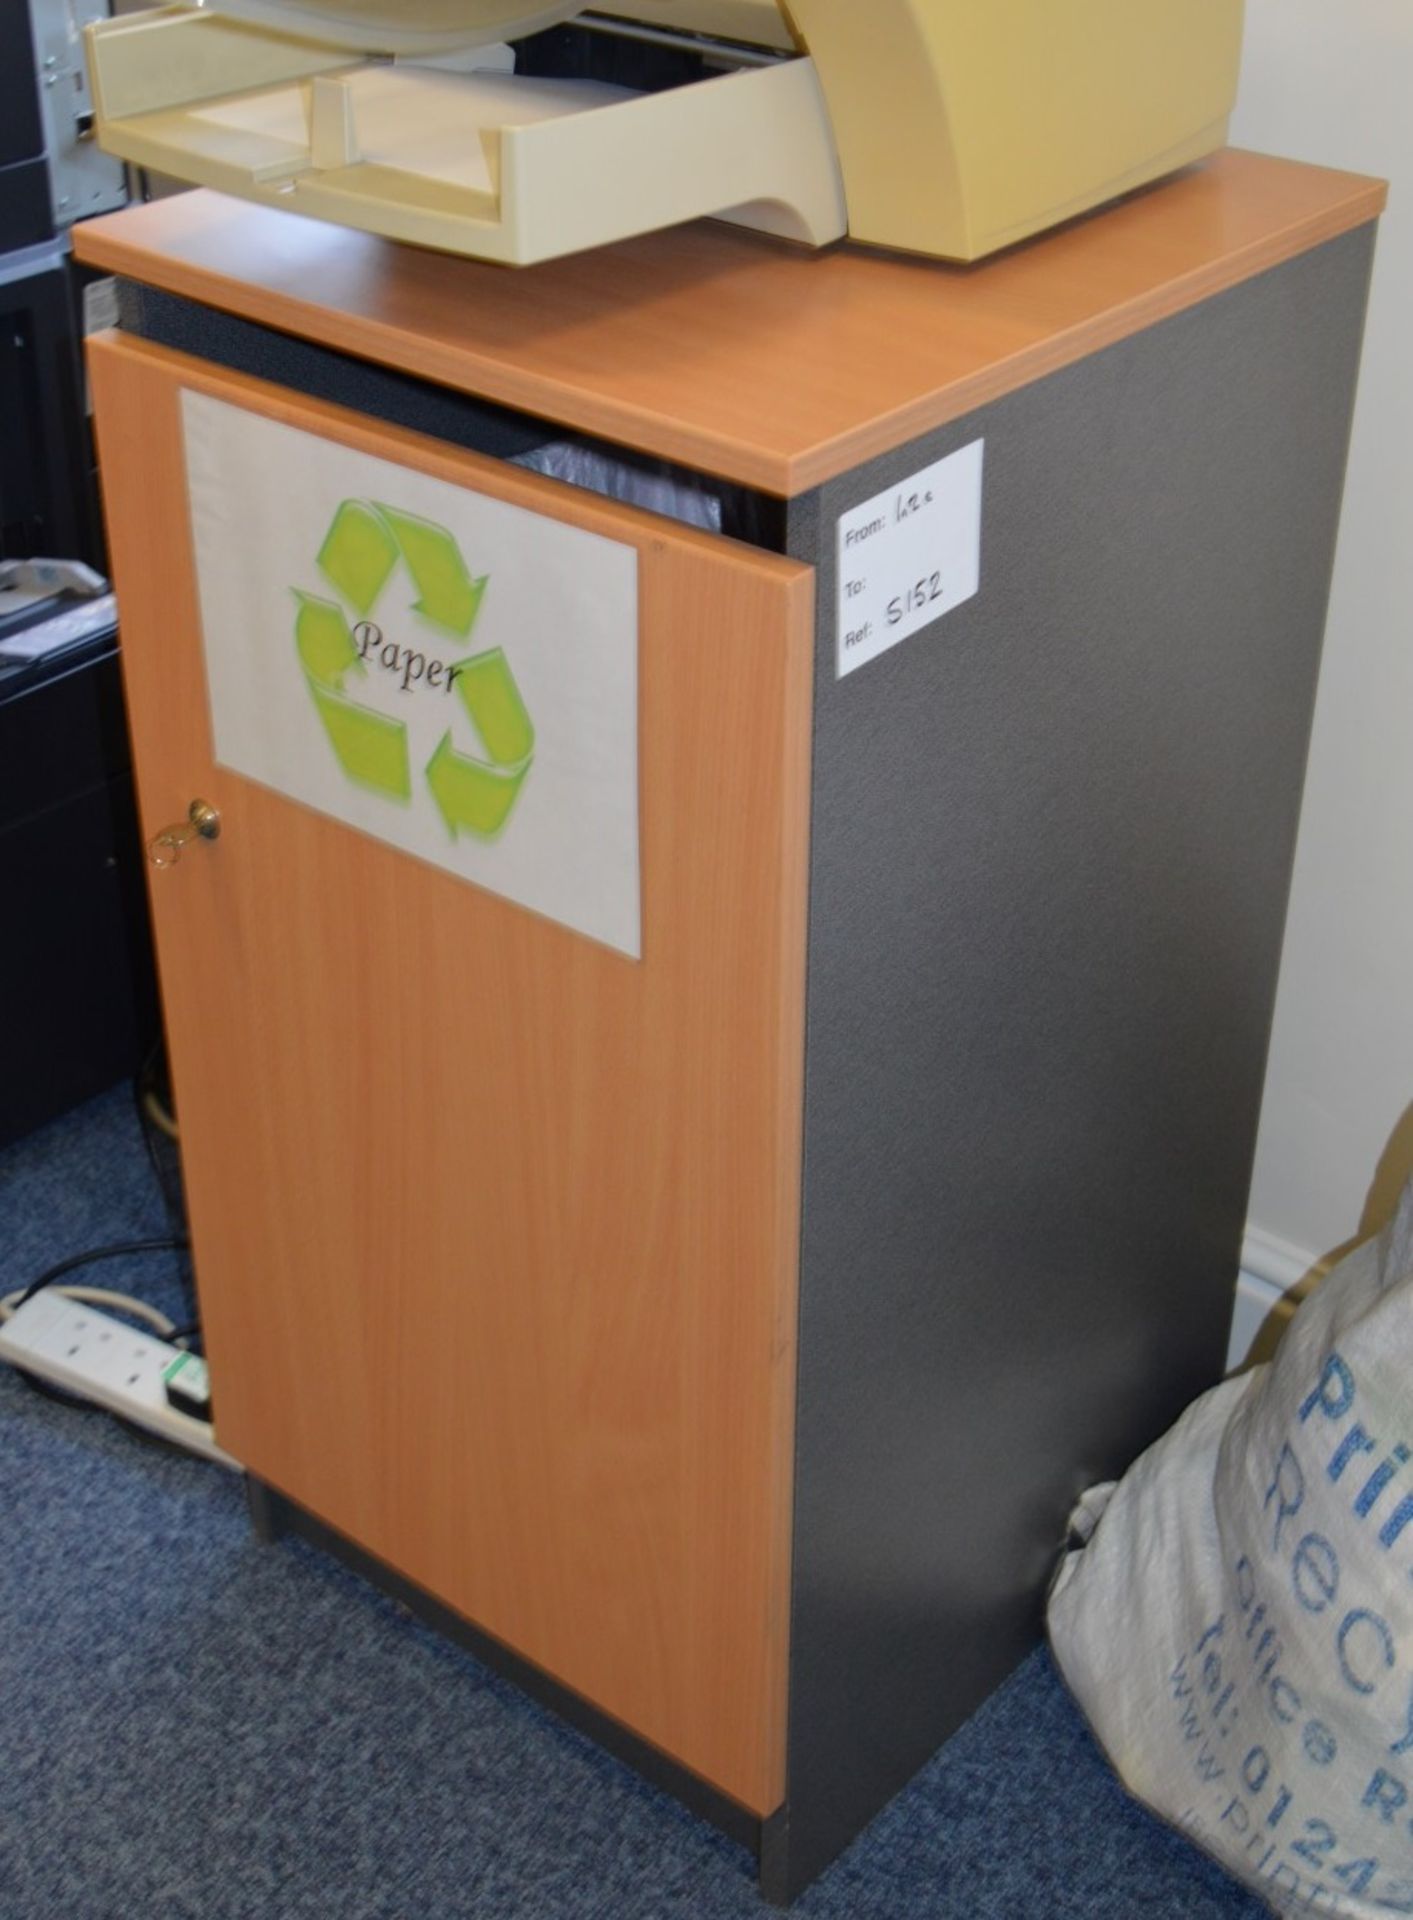 1 x Office Waste Cabinet - Moden Grey and Beech Finish - Ideal For Containing Waste Paper - Includes - Image 2 of 3